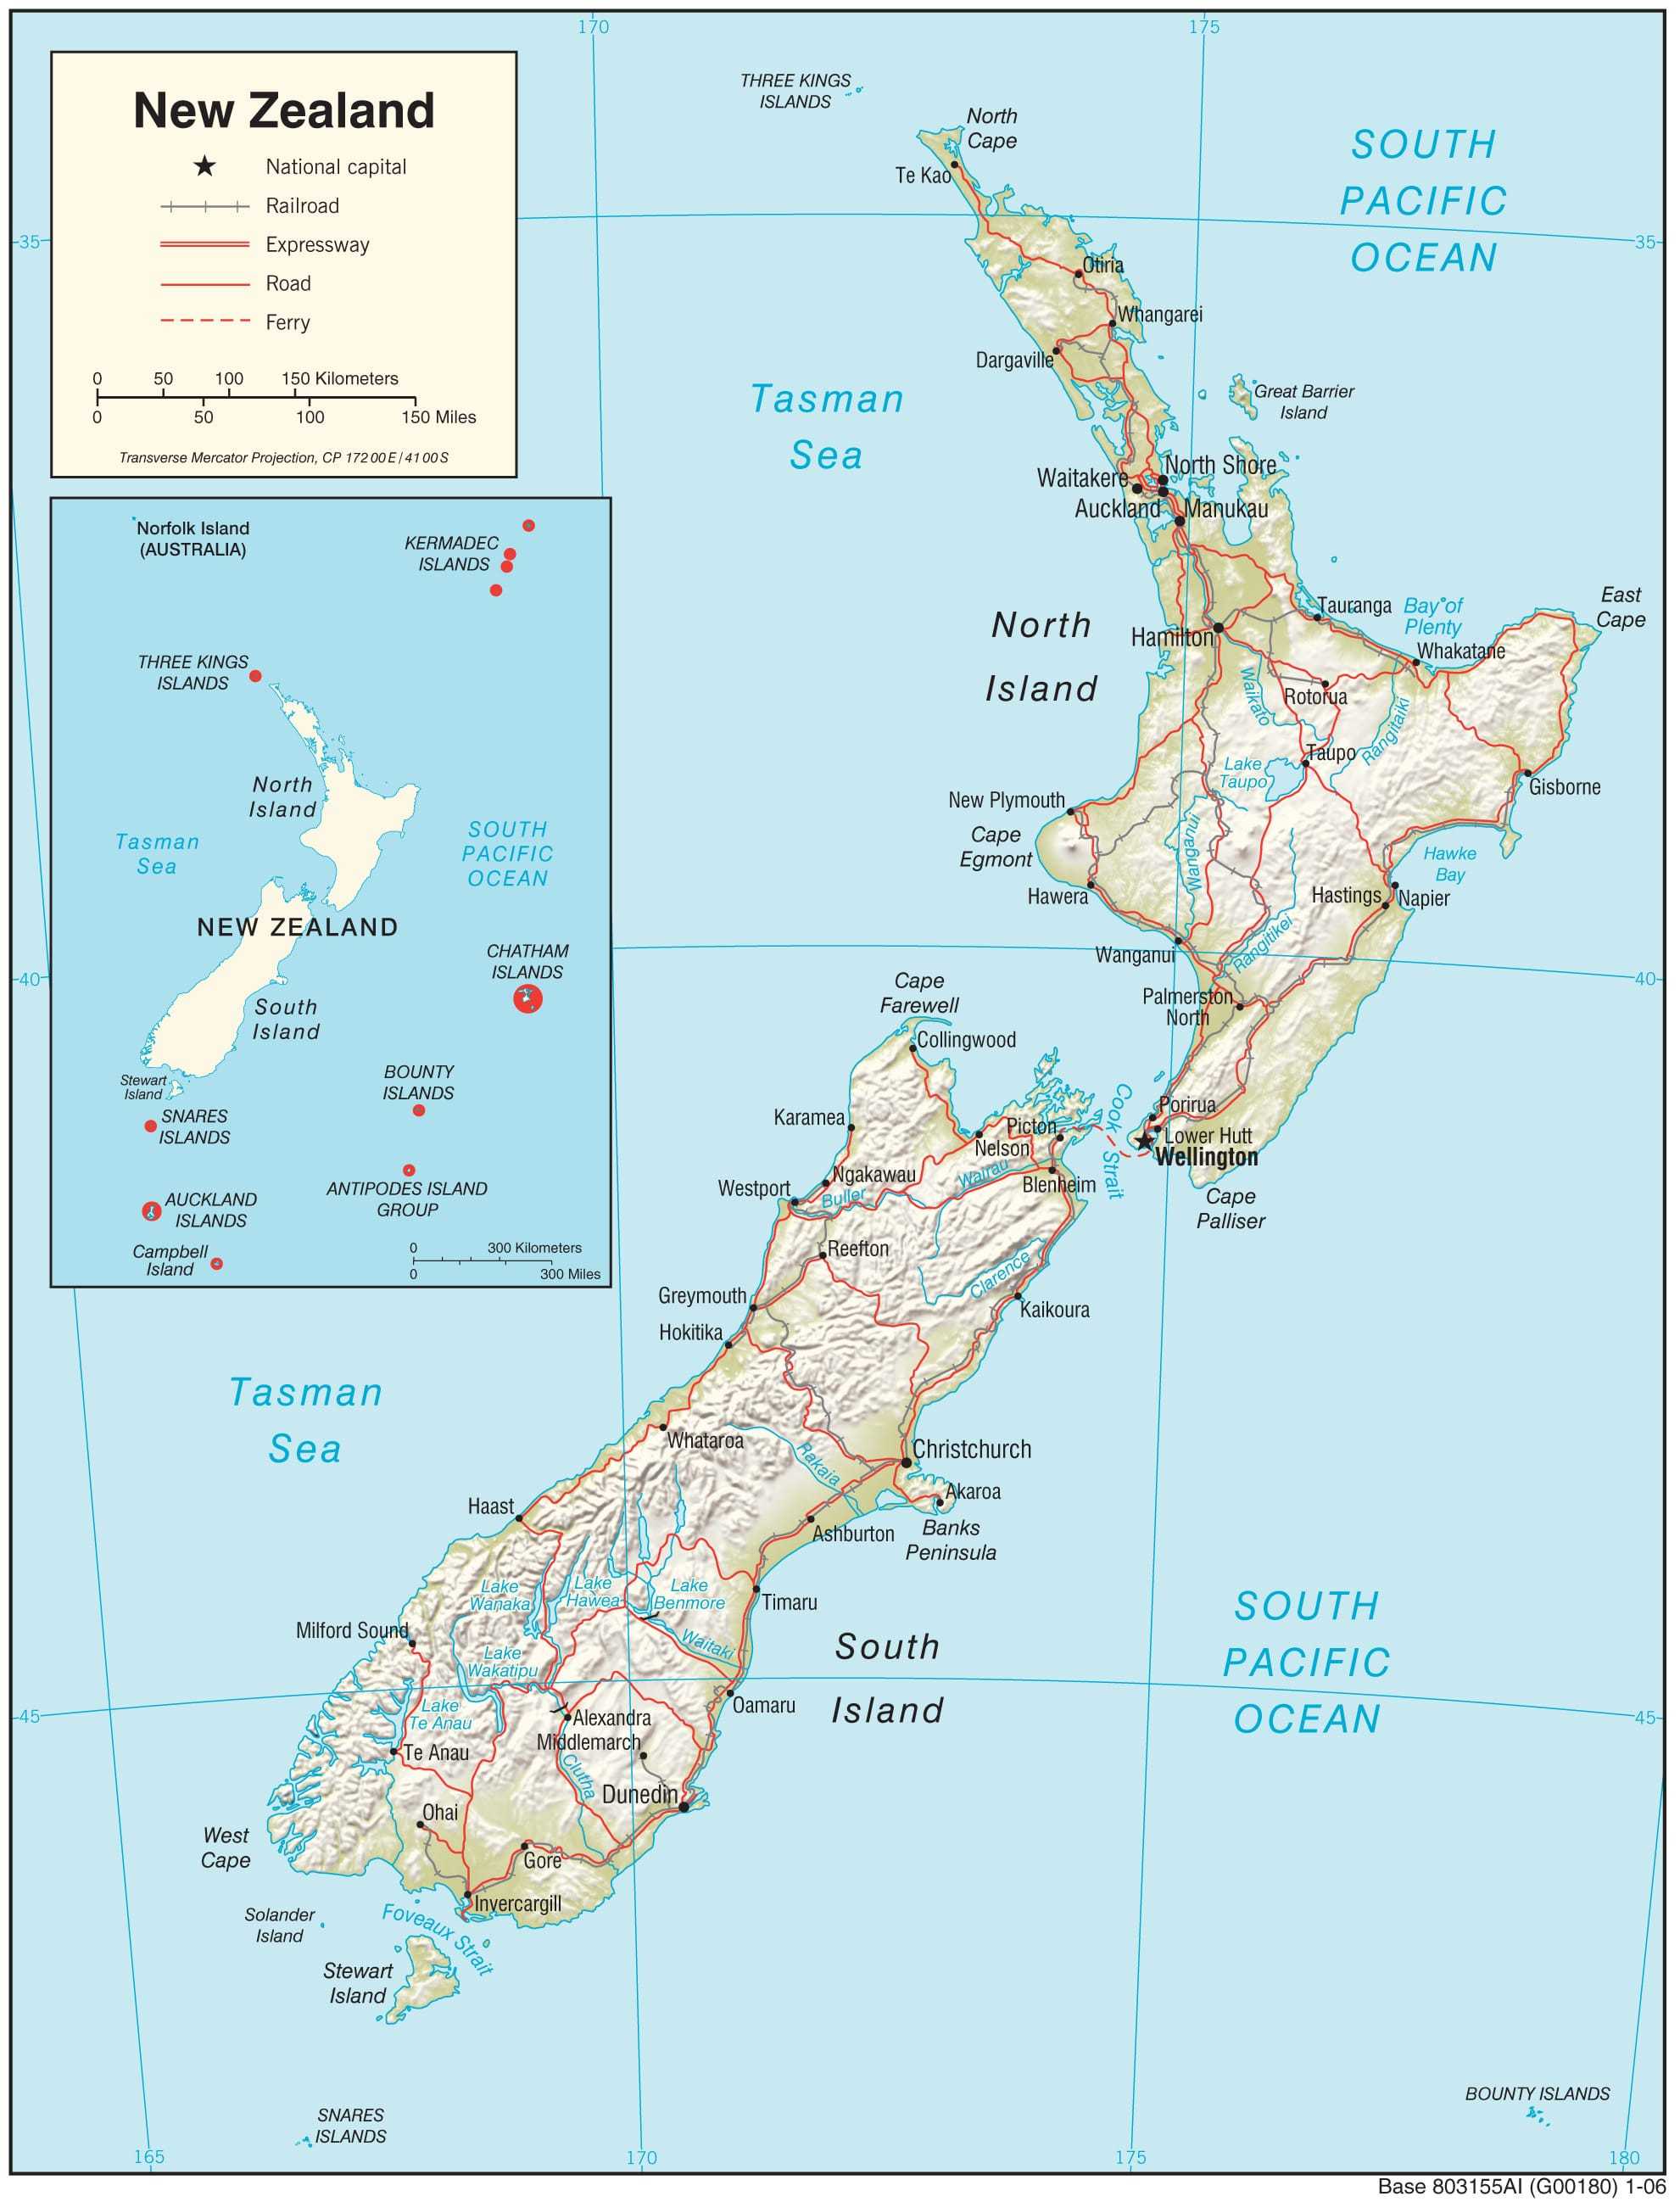 Physiographical map of New Zealand.